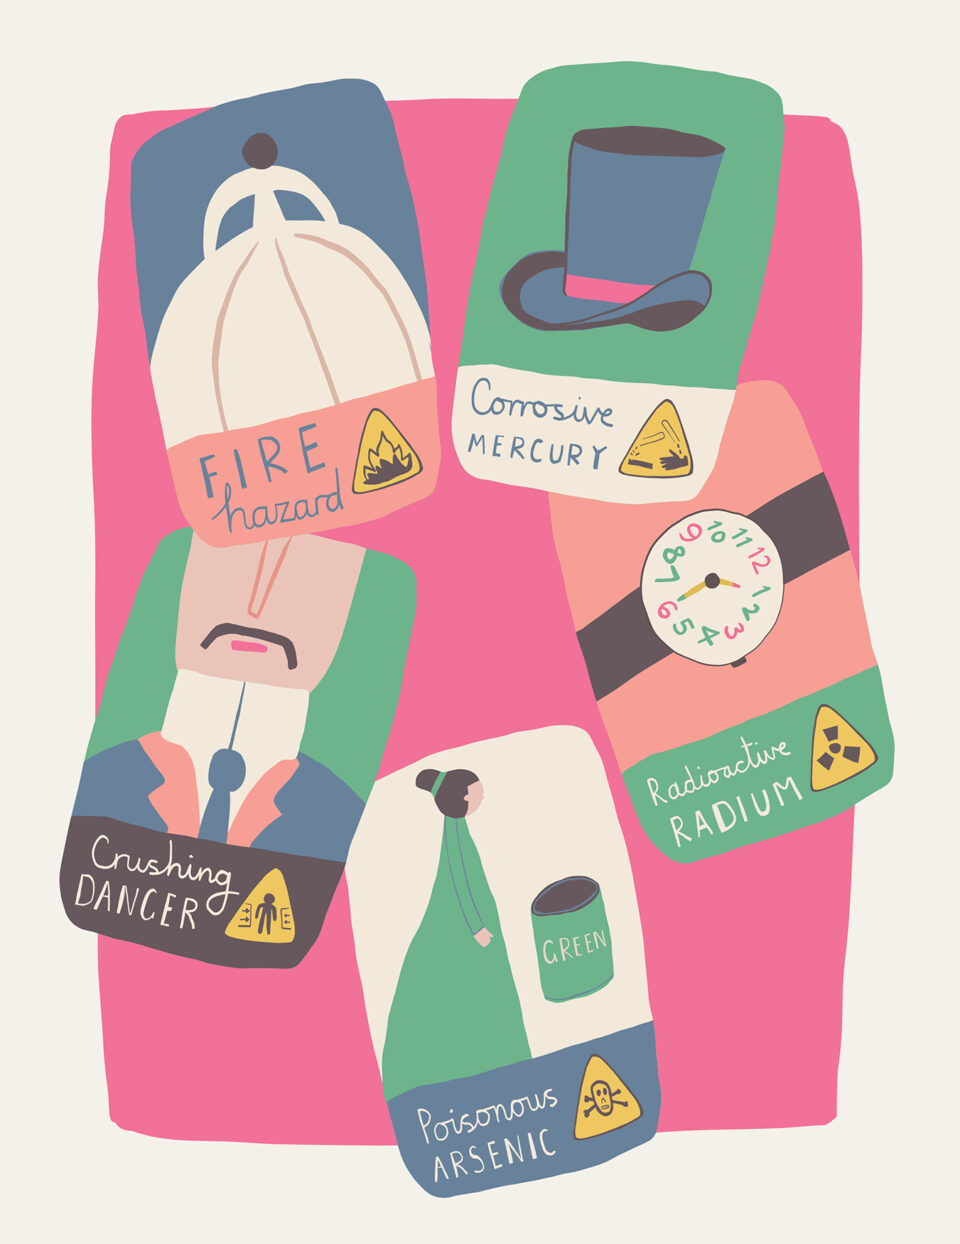 Five cards on a pink background. Each has a hazard symbol and words at the bottom with an illustration at the top. One shows a fire hazard and a picture of a woman in a very large skirt. Another shows Corrosive Mercury and shows a top hat. Another shows Crushing Danger and a man with a large constrictive collar. Another shows Radioactive Radium and a watch with glowing numbers. The final one shows Poisonous Arsenic and a woman wearing a green dress and green head band next to a tin of green paint. Illustrated by Tasha Goddard.